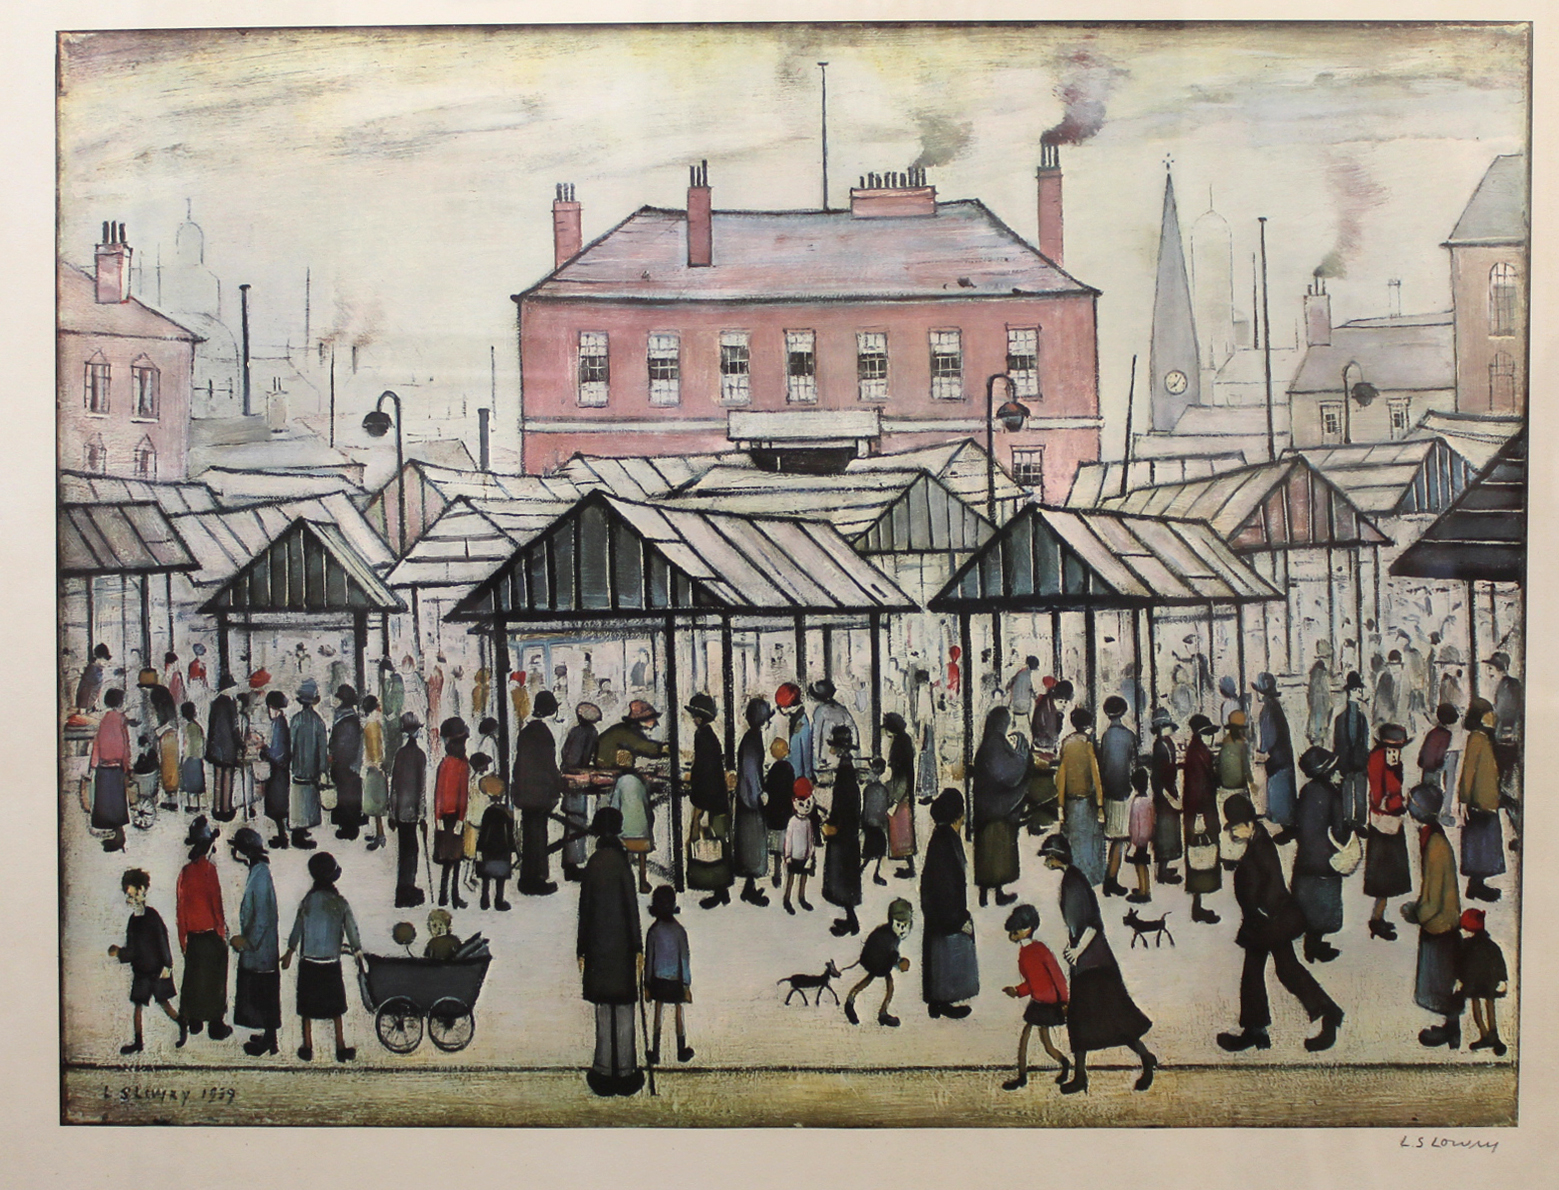 AR Laurence Stephen Lowry, RA (1887-1976) "Market Scene in a Northern Town" coloured print, with